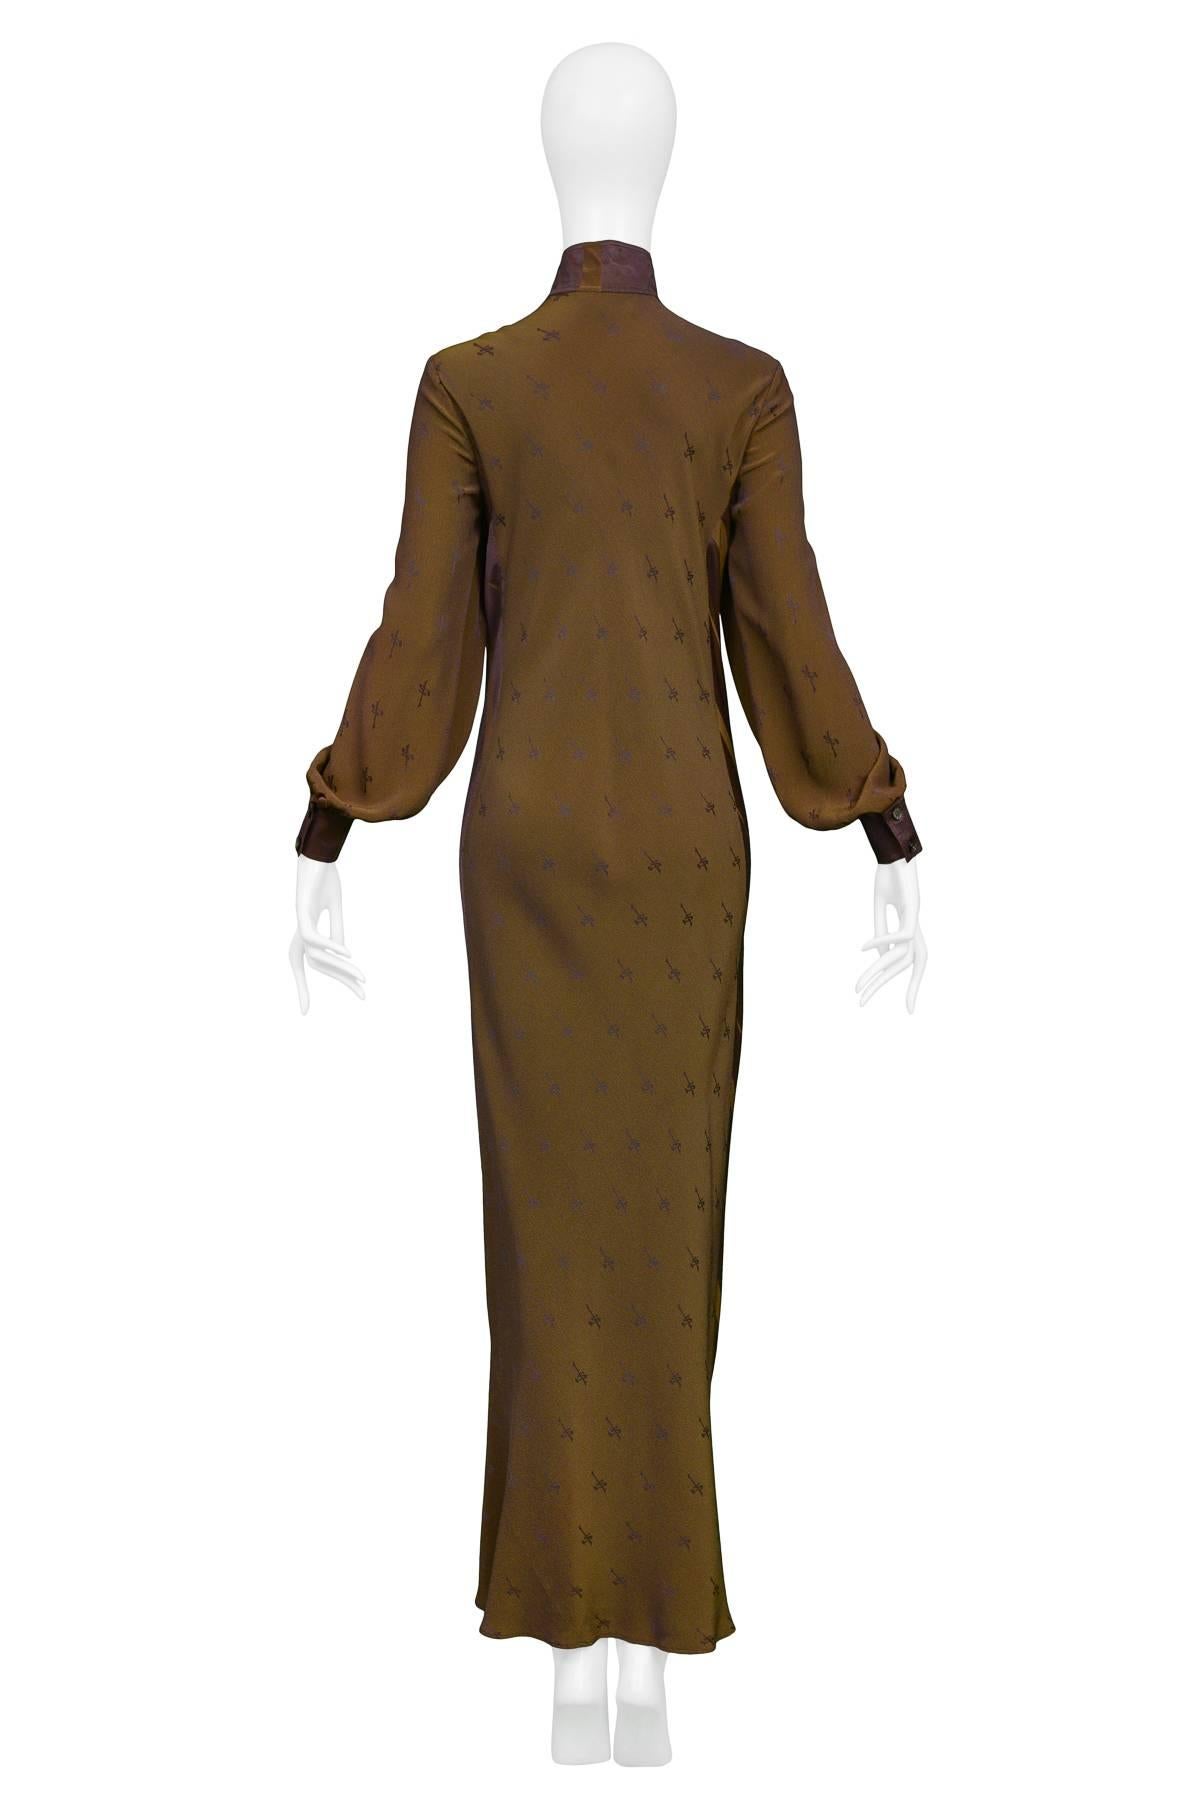 Alice Pollock  Two Tone Cameo Gown 1978 In Excellent Condition In Los Angeles, CA